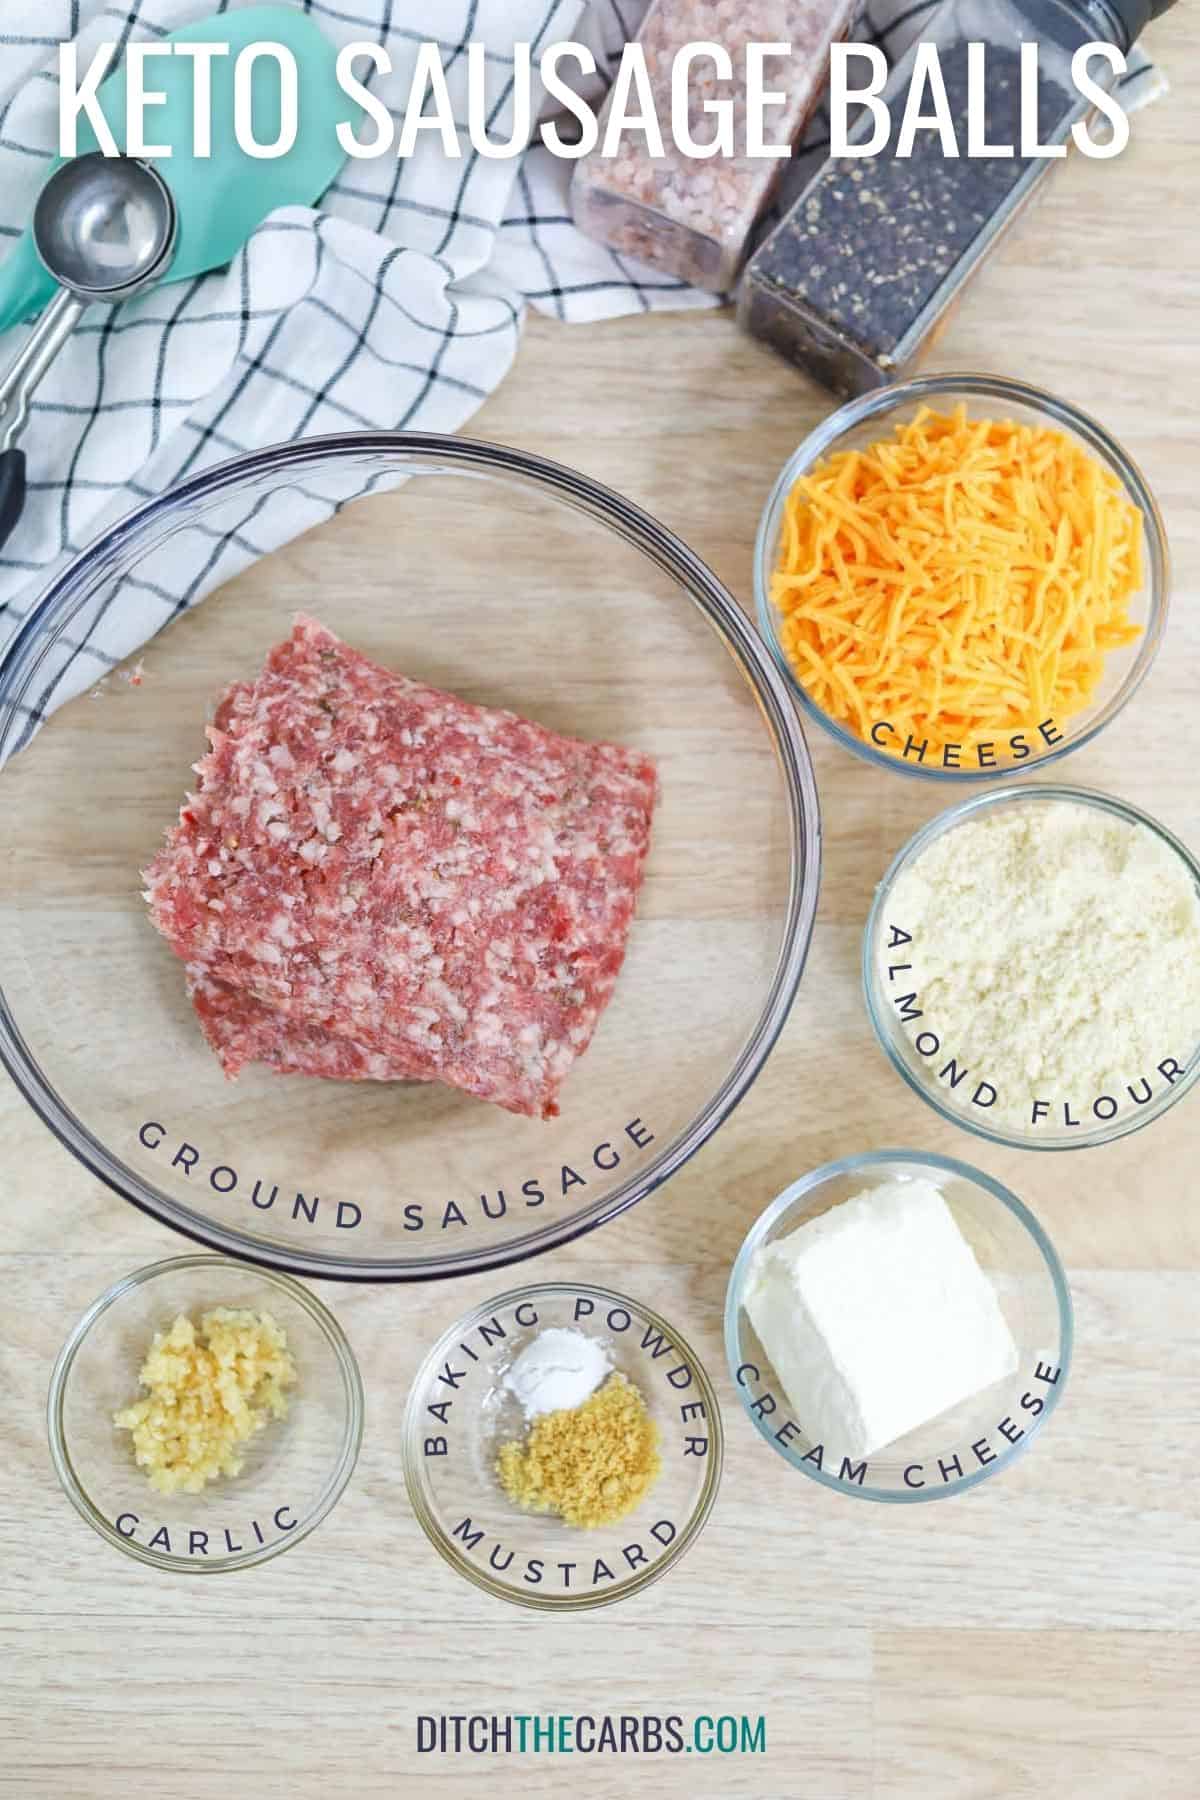 keto sausage balls ingredients measured out in glass bowls